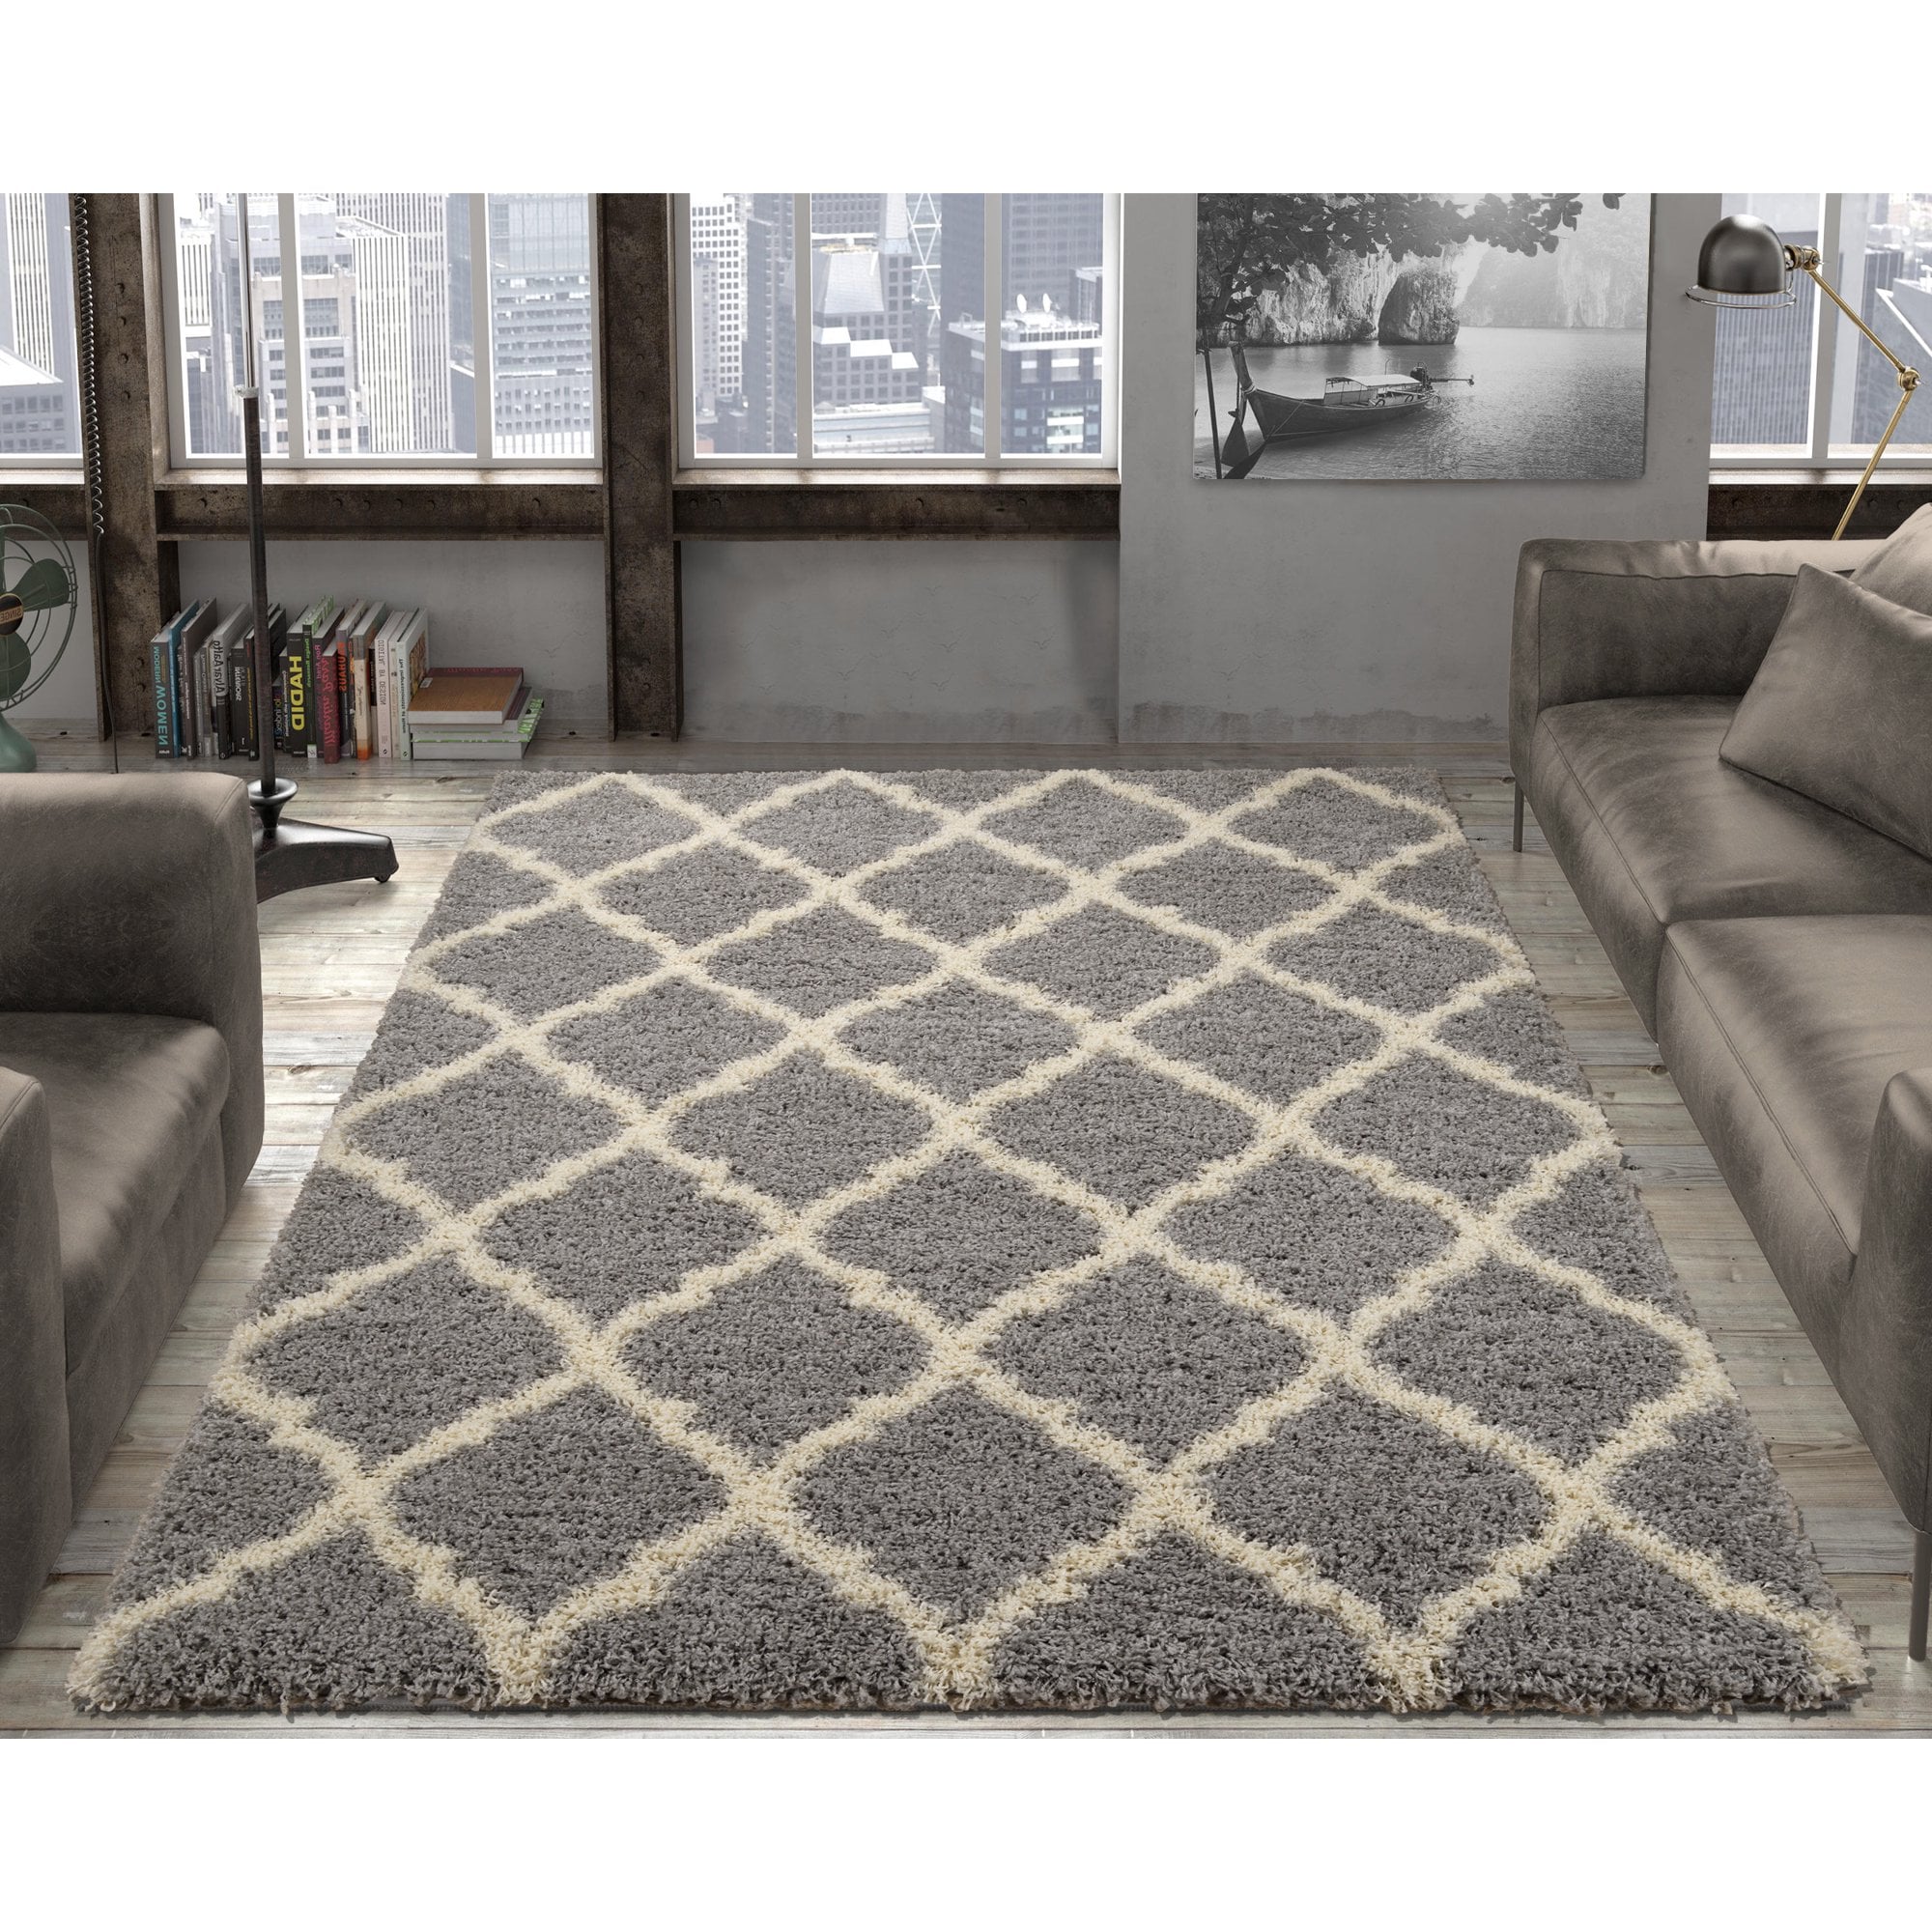 aan de andere kant, Premedicatie Onderverdelen Ottomanson Ultimate Moroccan Trellis Design Area Rug | 23 Luxurious Area  Rugs You Can Buy For $150 or Less, Thanks to the Internet | POPSUGAR Home  Photo 18